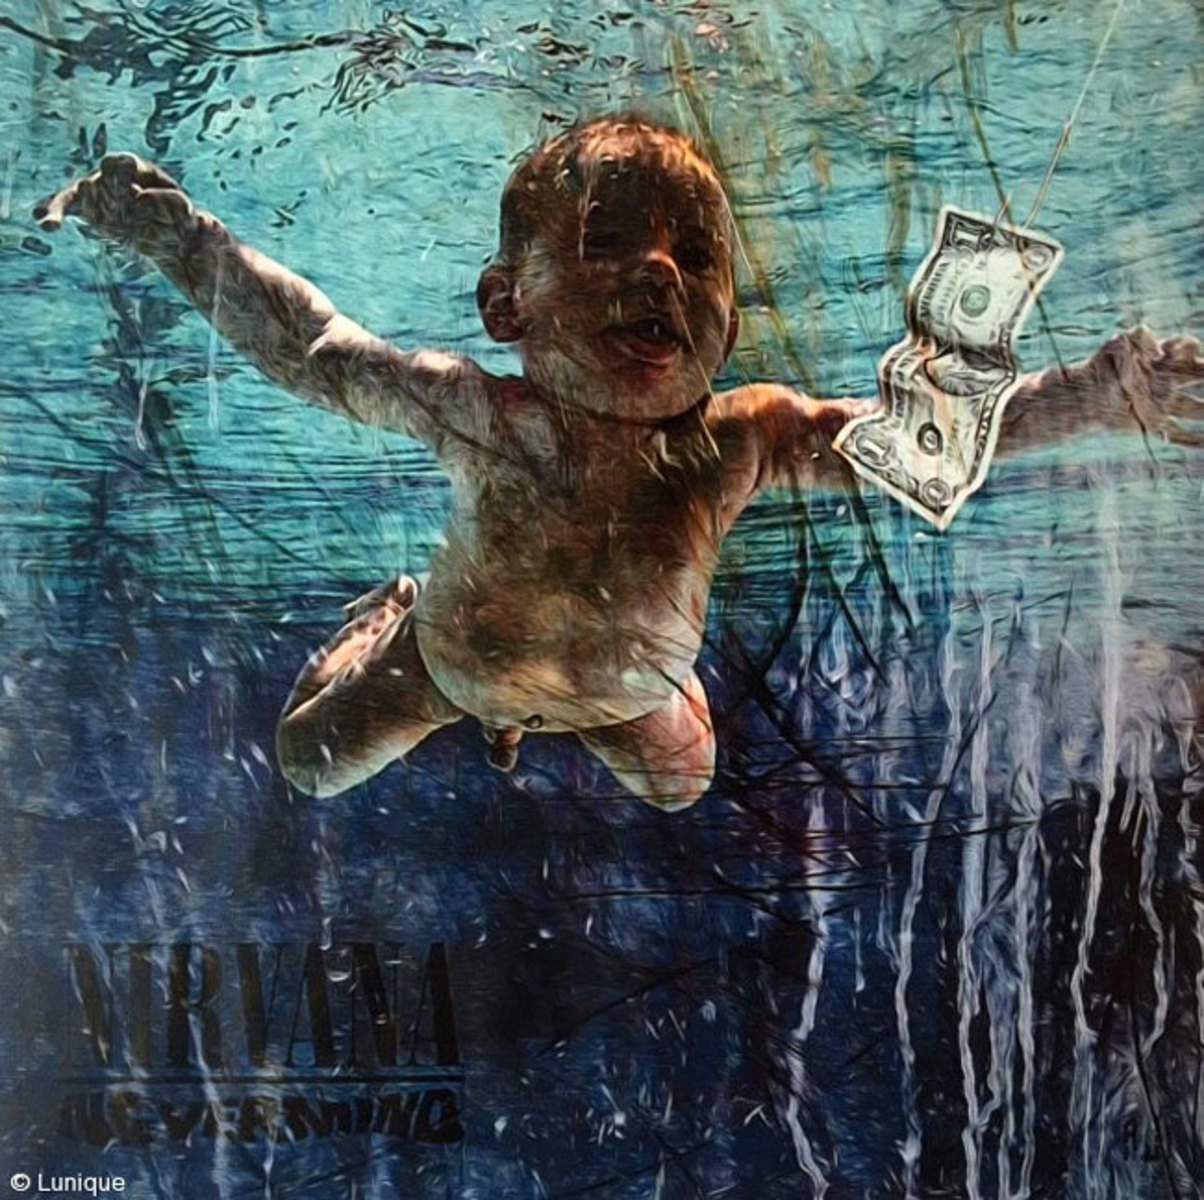 "Nevermind" Limited Art Print on Canvas by AJ